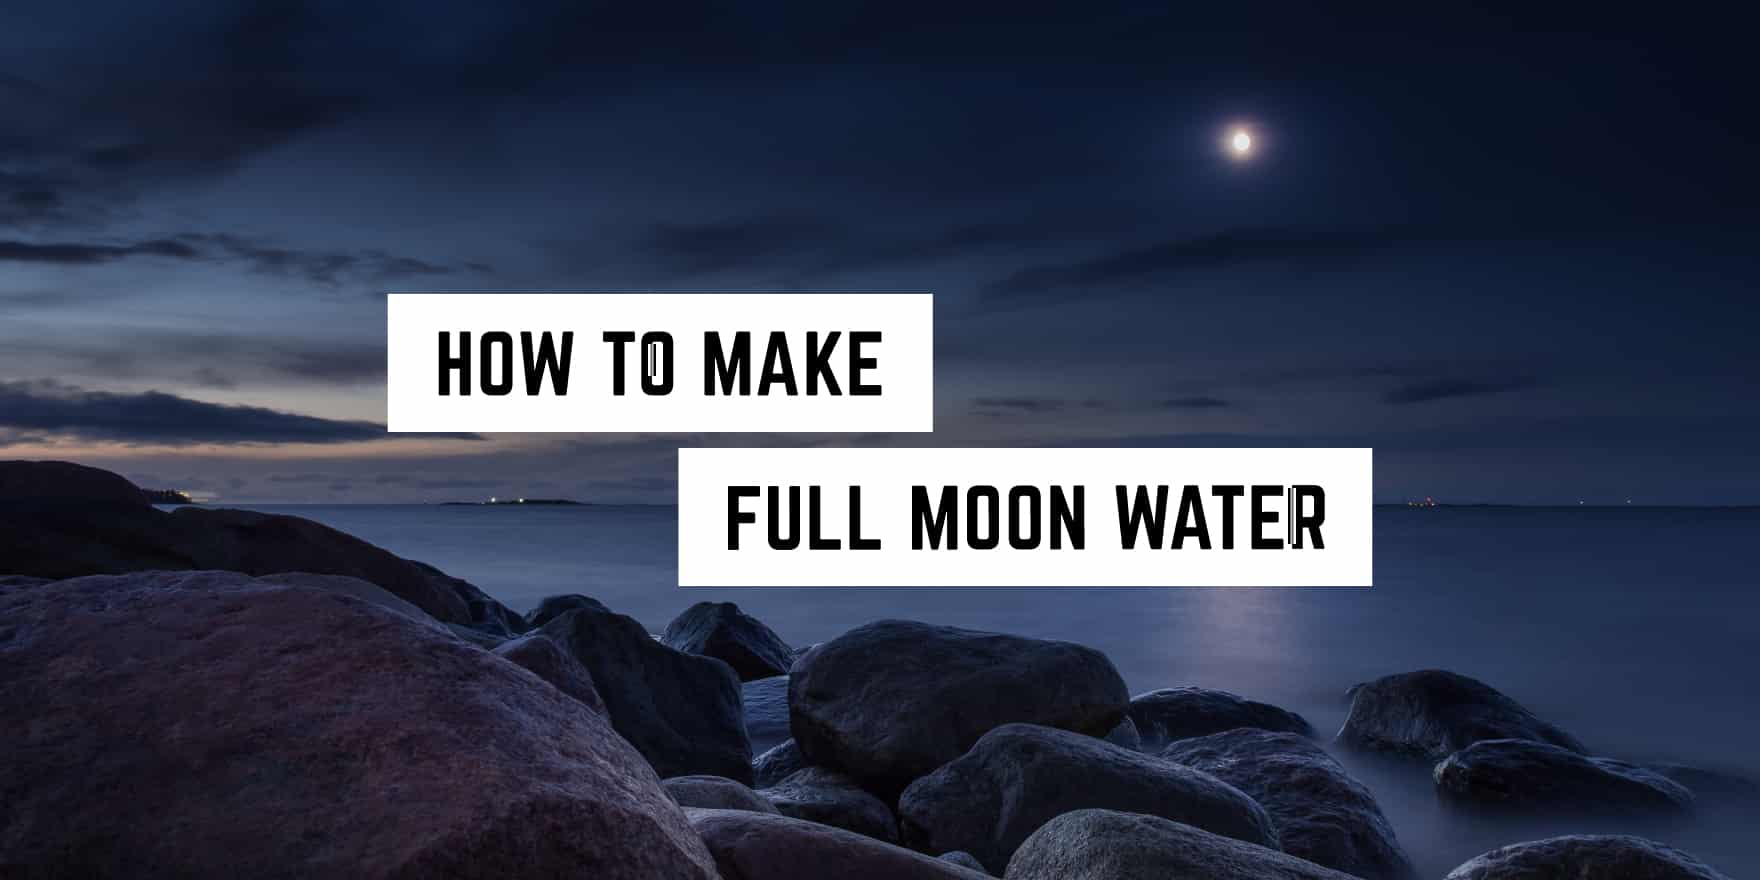 How to Make Full Moon Water